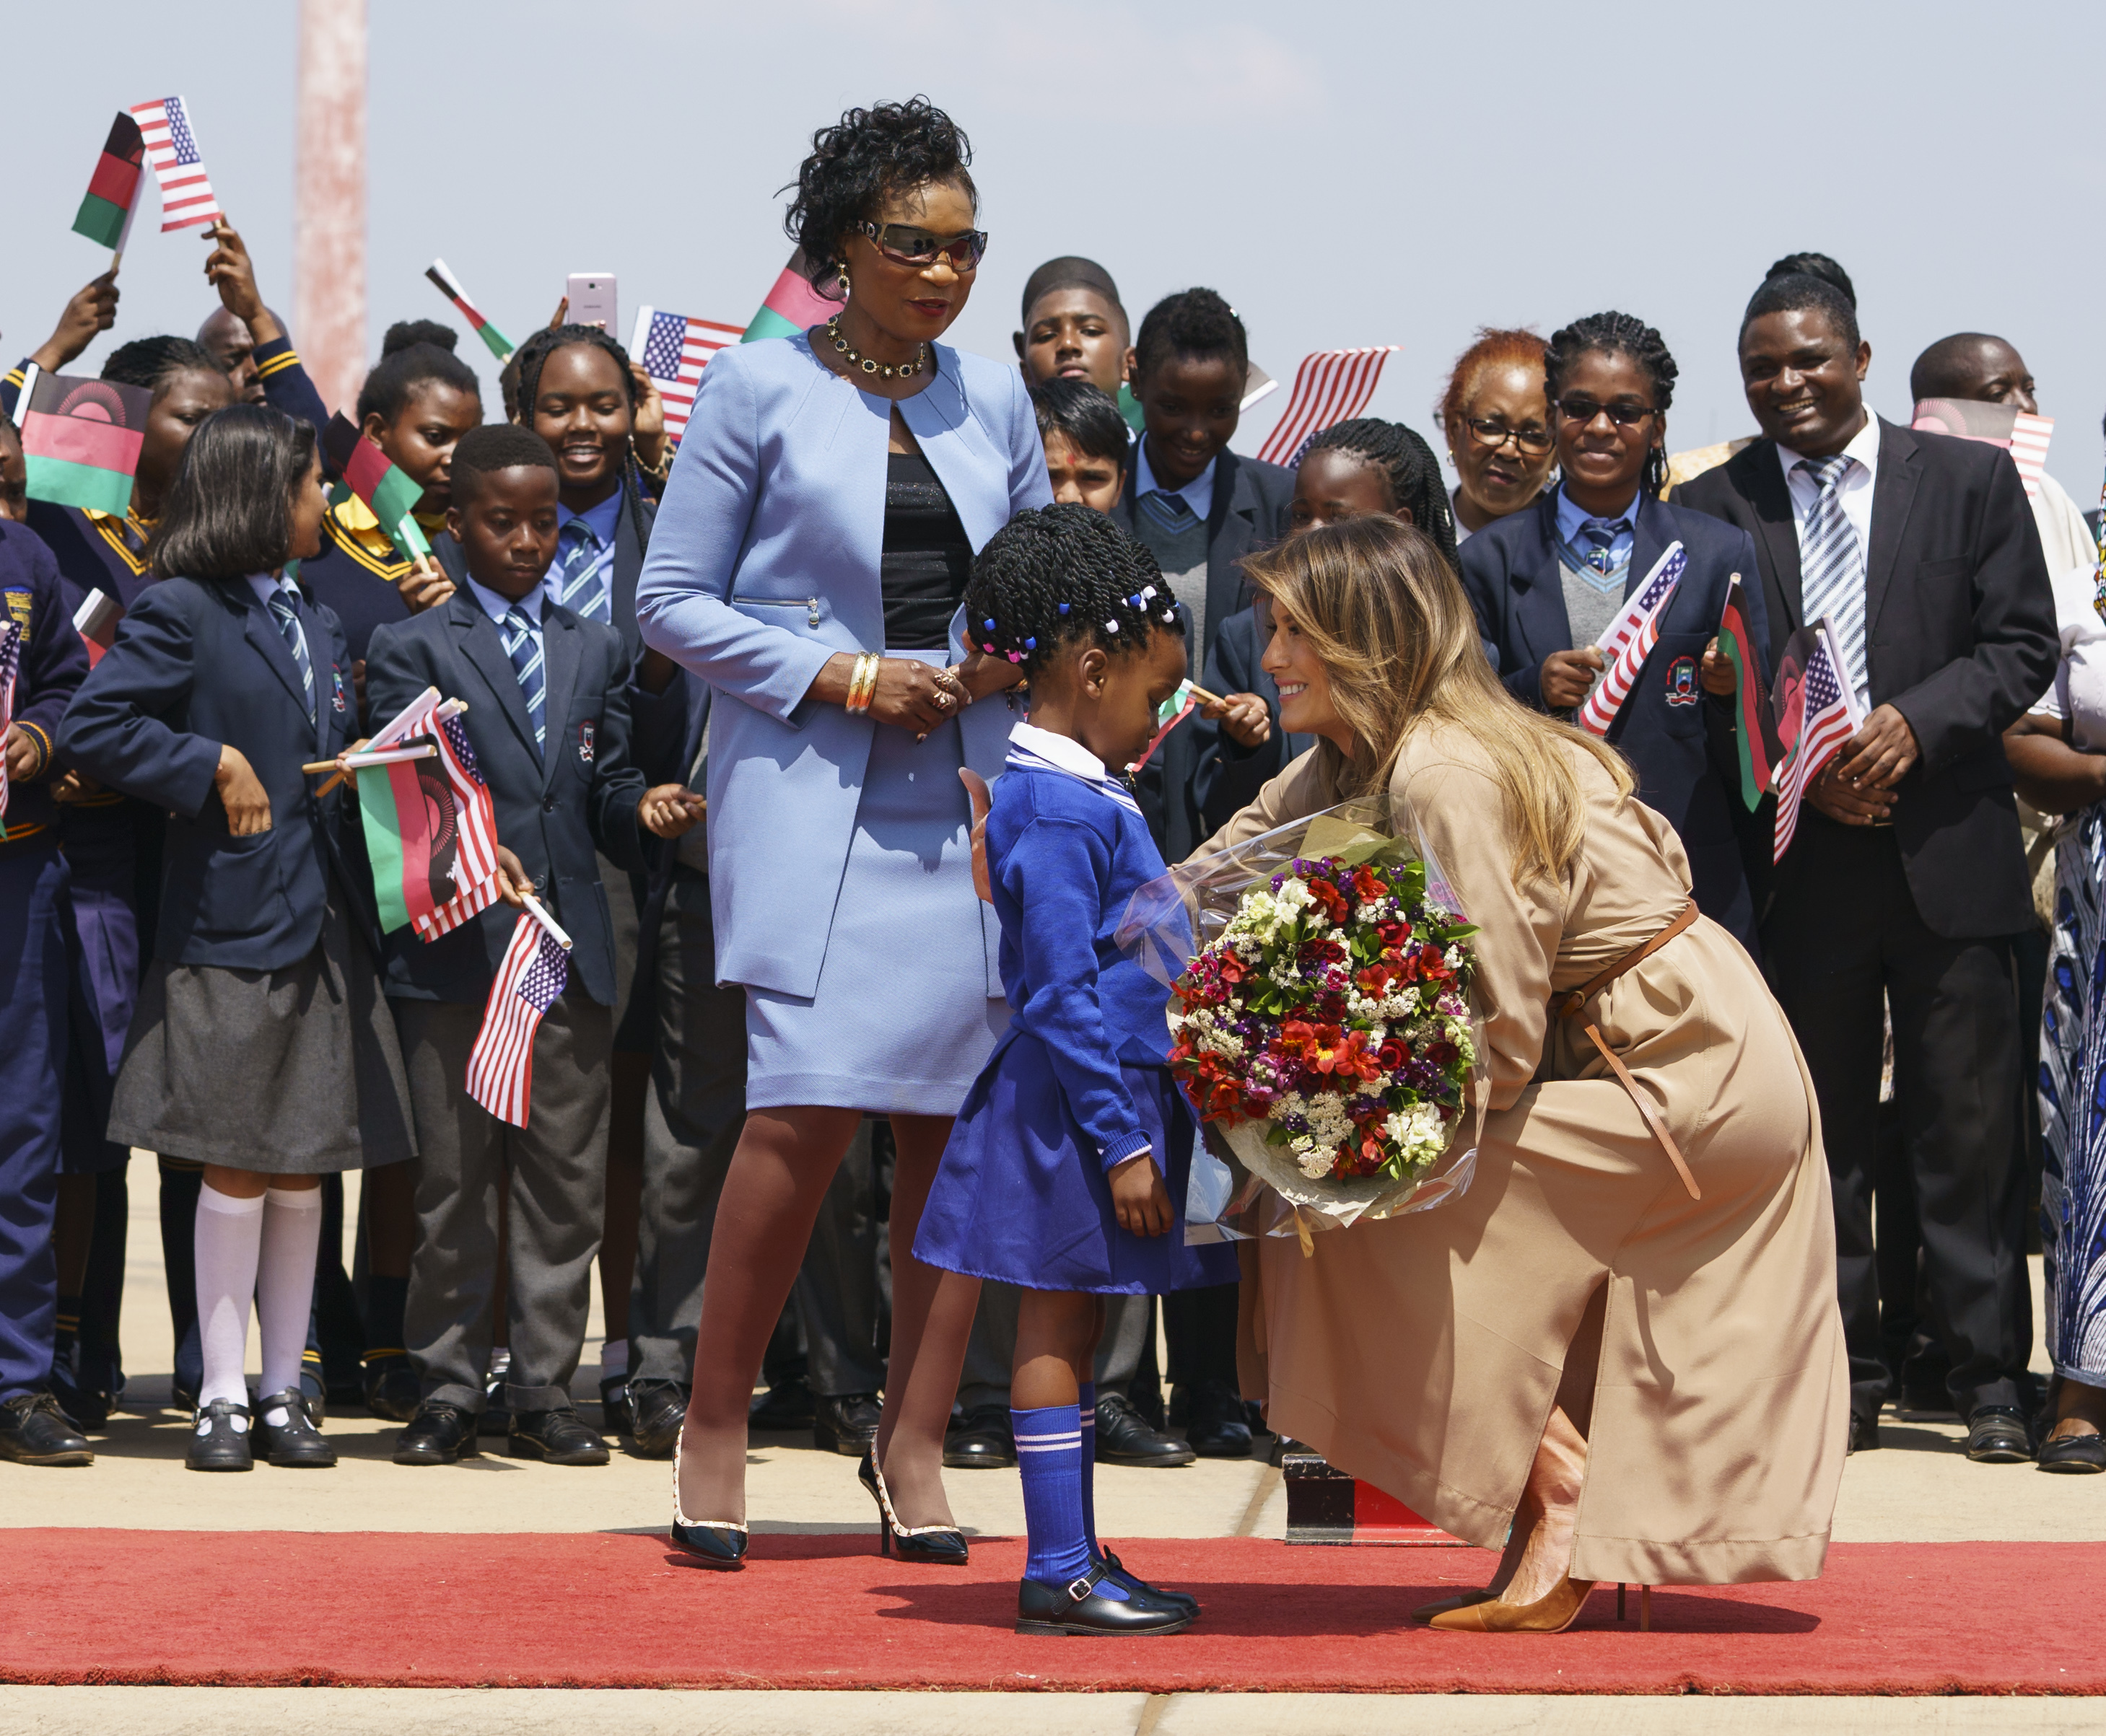 Melania Trump is greeted by Malawi first lady Gertrude Maseko and a flower girl as she arrives at Lilongwe International Airport 